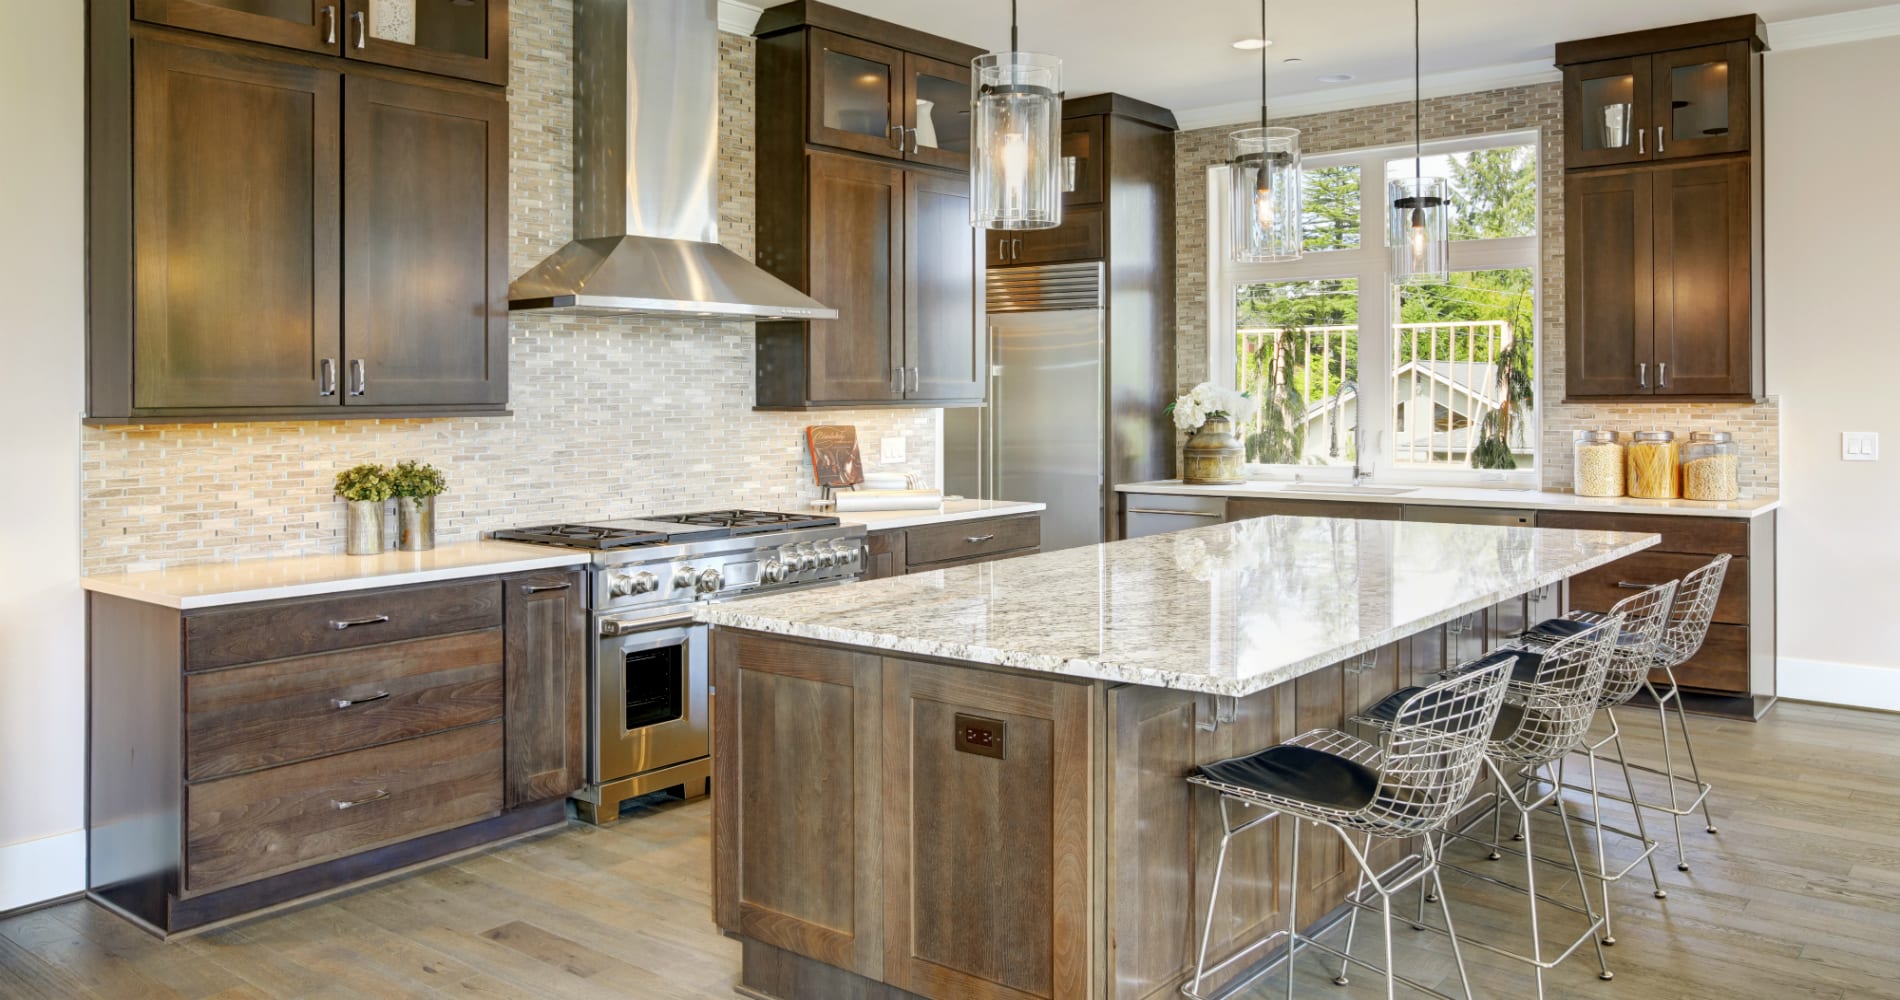 Kitchen Remodeling Tips Should You Replace or Reface Your Cabinets